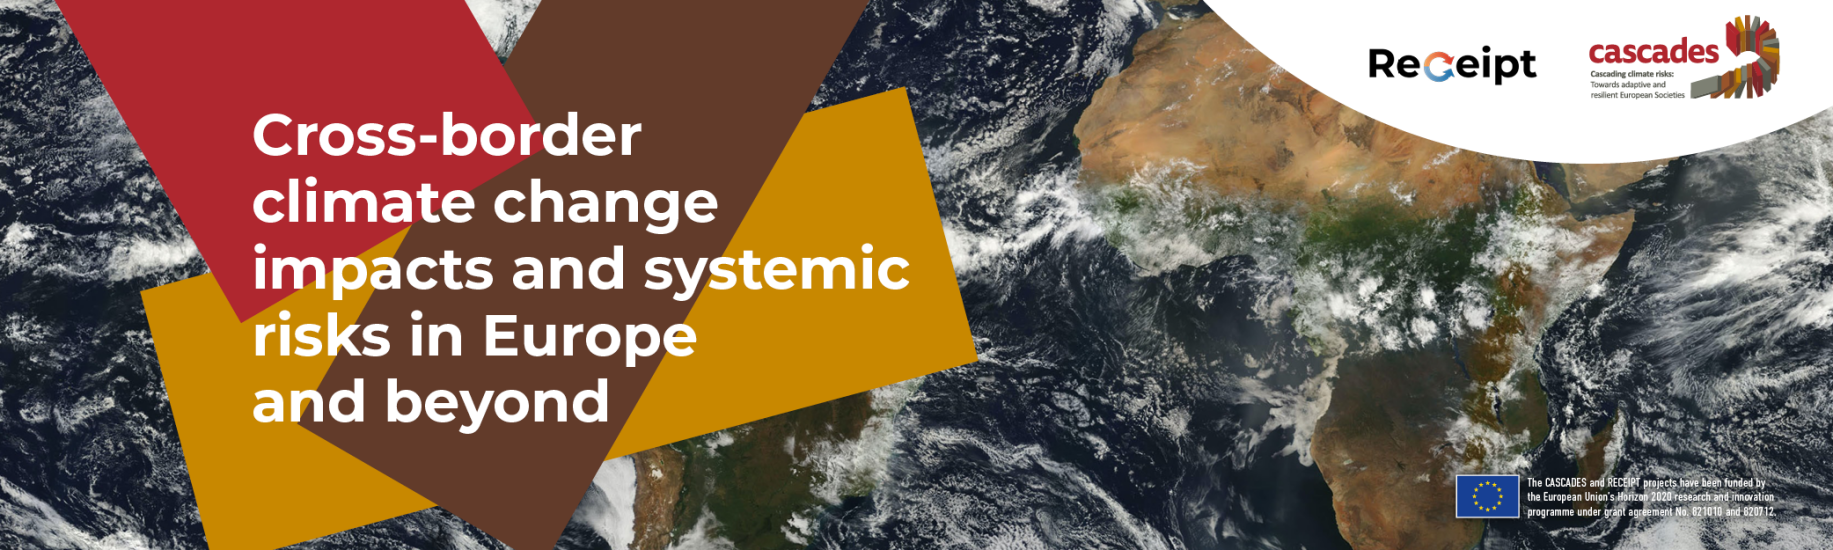 Cross-border climate change impacts and systemic risks in Europe and beyond